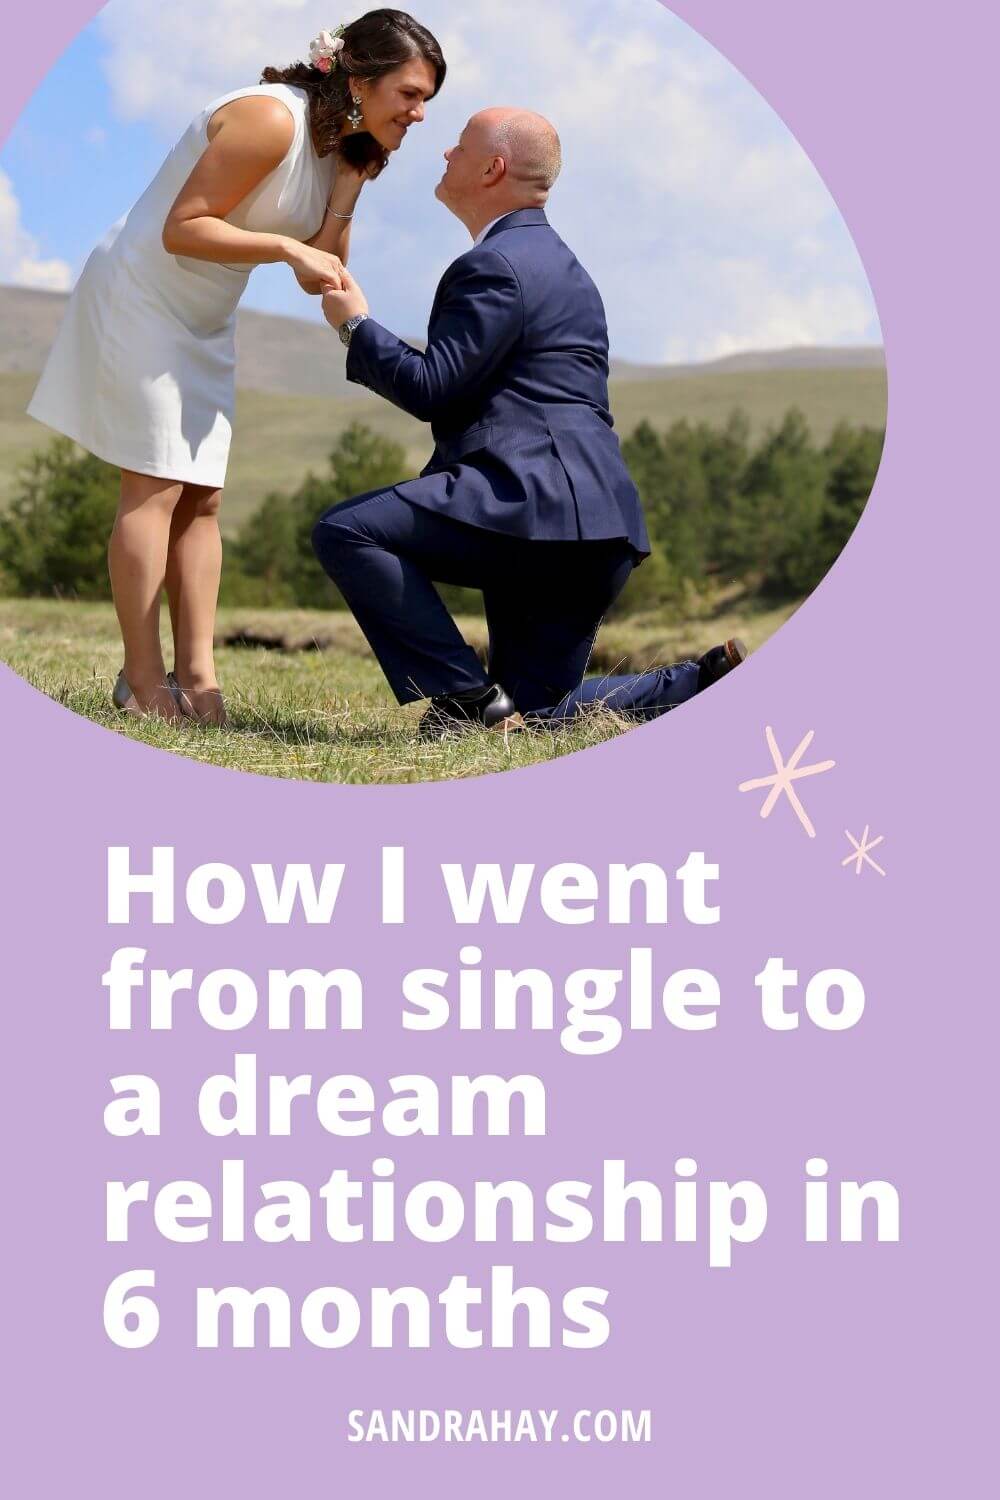 How I went from single to a dream relationship in 6 months